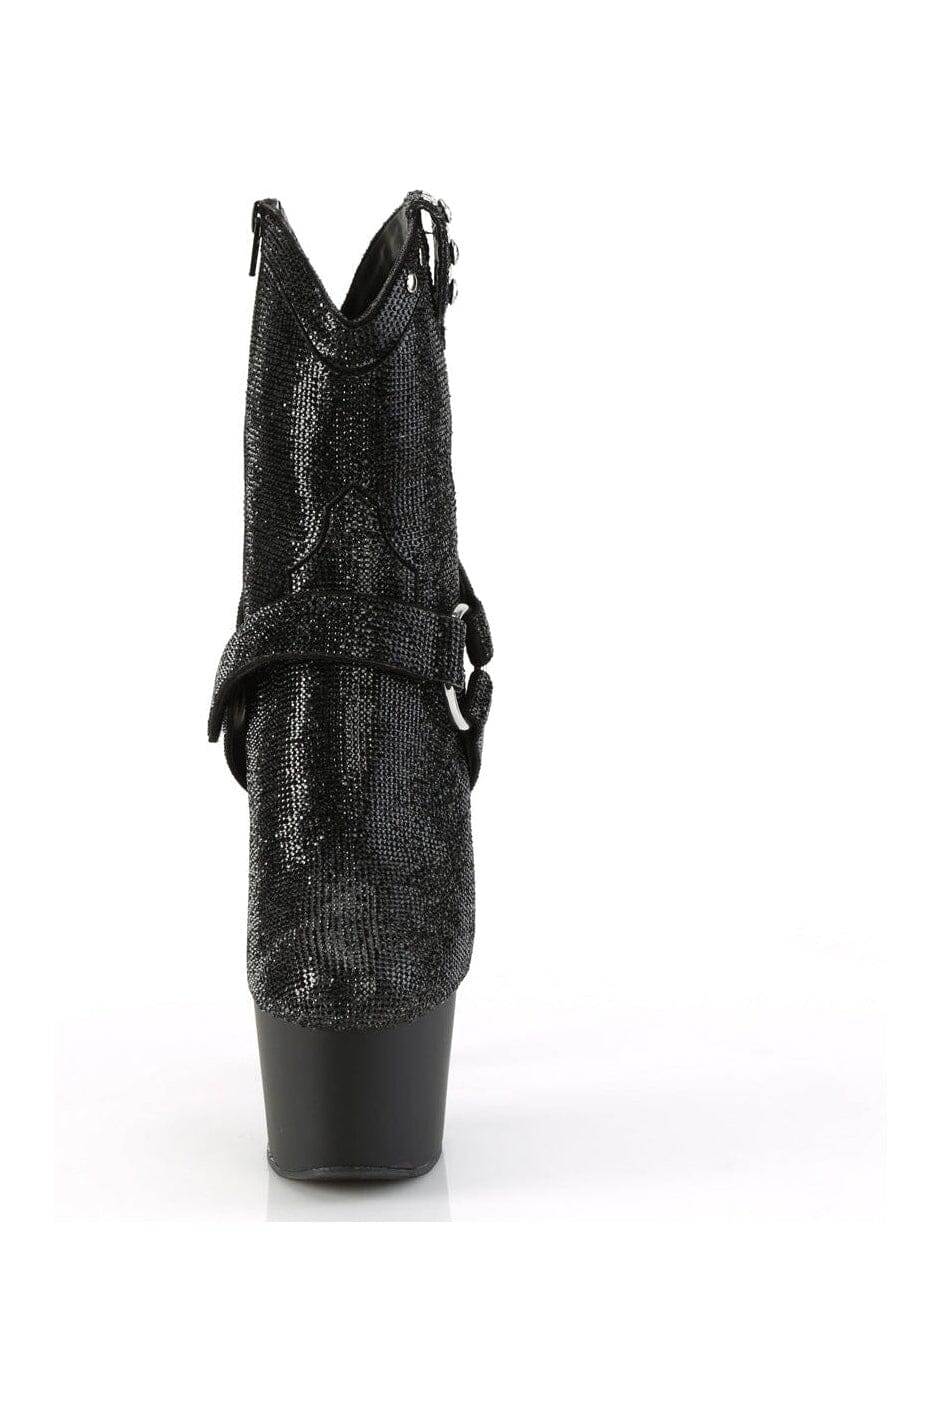 ADORE-1029RS Black Faux Suede Ankle Boot-Ankle Boots-Pleaser-SEXYSHOES.COM